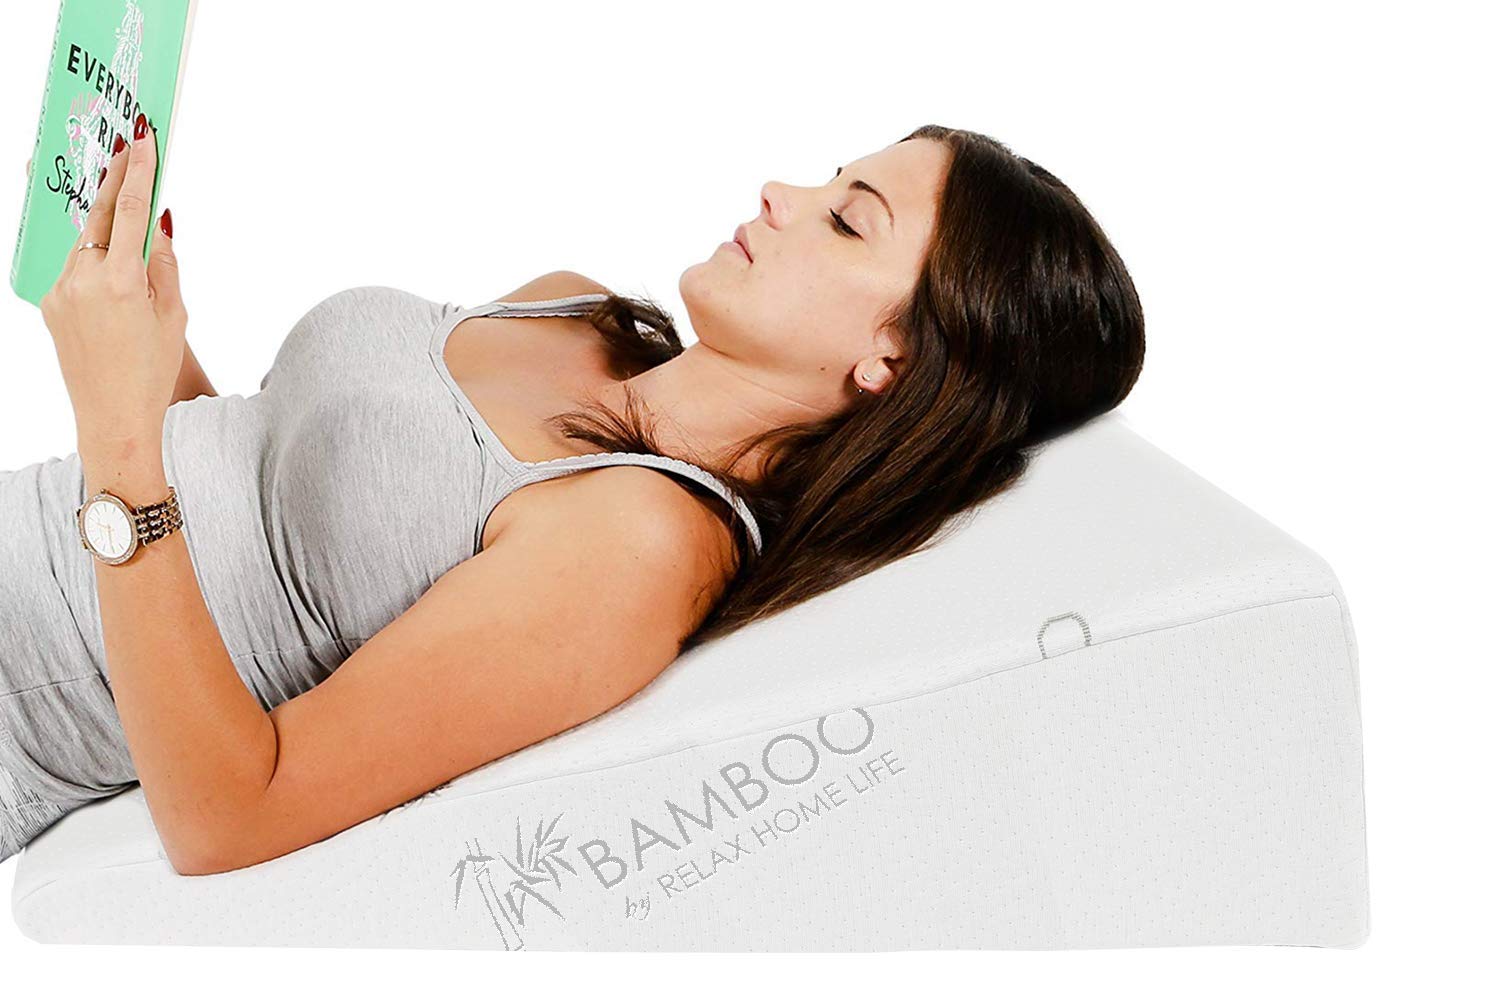 https://www.momjunction.com/wp-content/uploads/product-images/relax-home-life-75i-bed-wedge-pillow_afl252.jpg